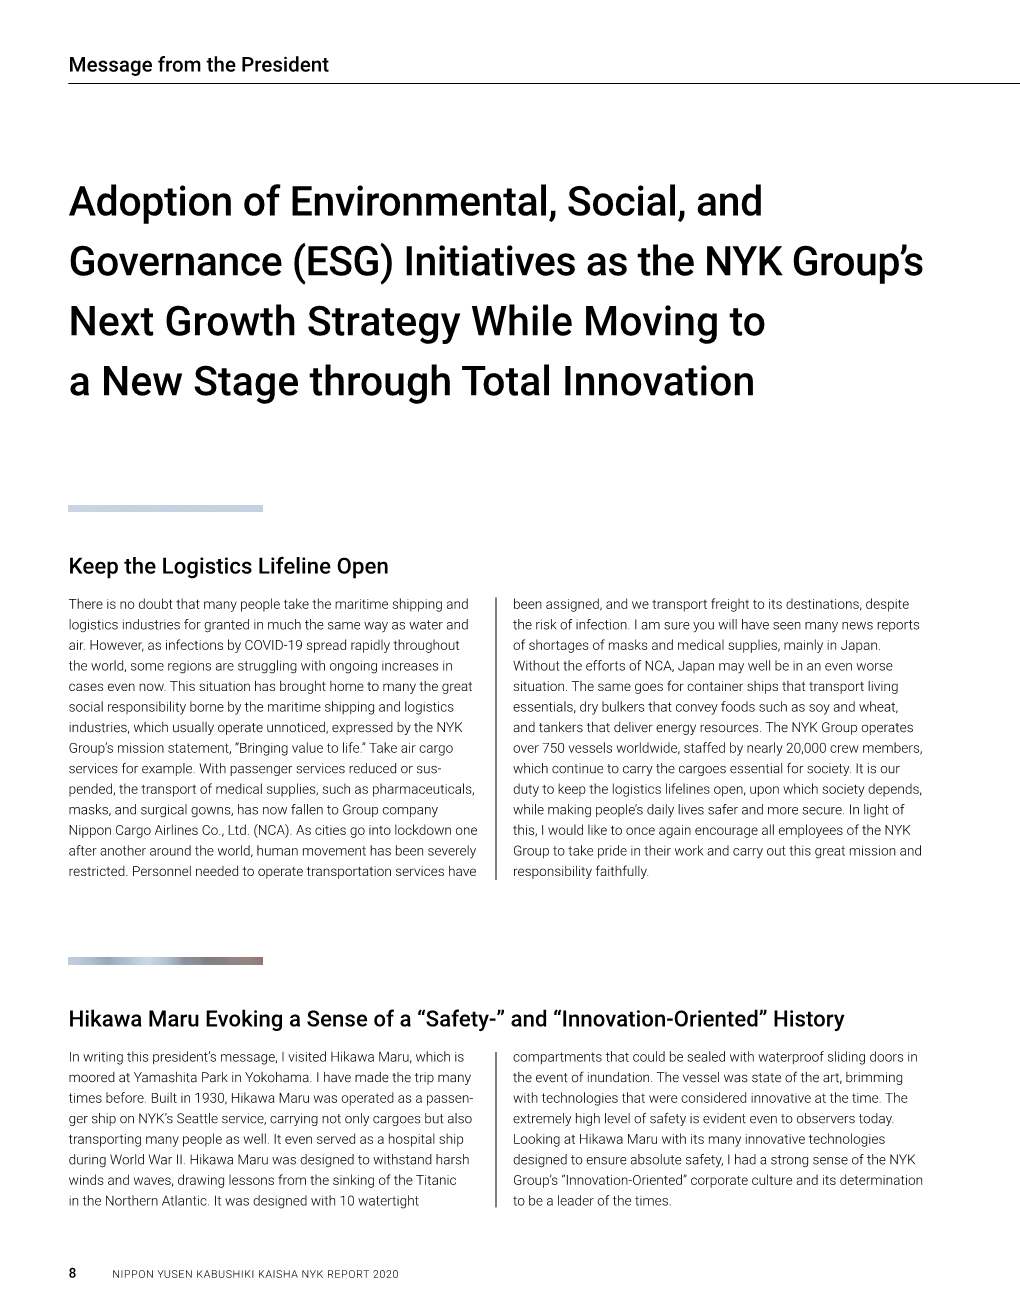 Adoption of Environmental, Social, and Governance (ESG) Initiatives As the NYK Group’S Next Growth Strategy While Moving to a New Stage Through Total Innovation